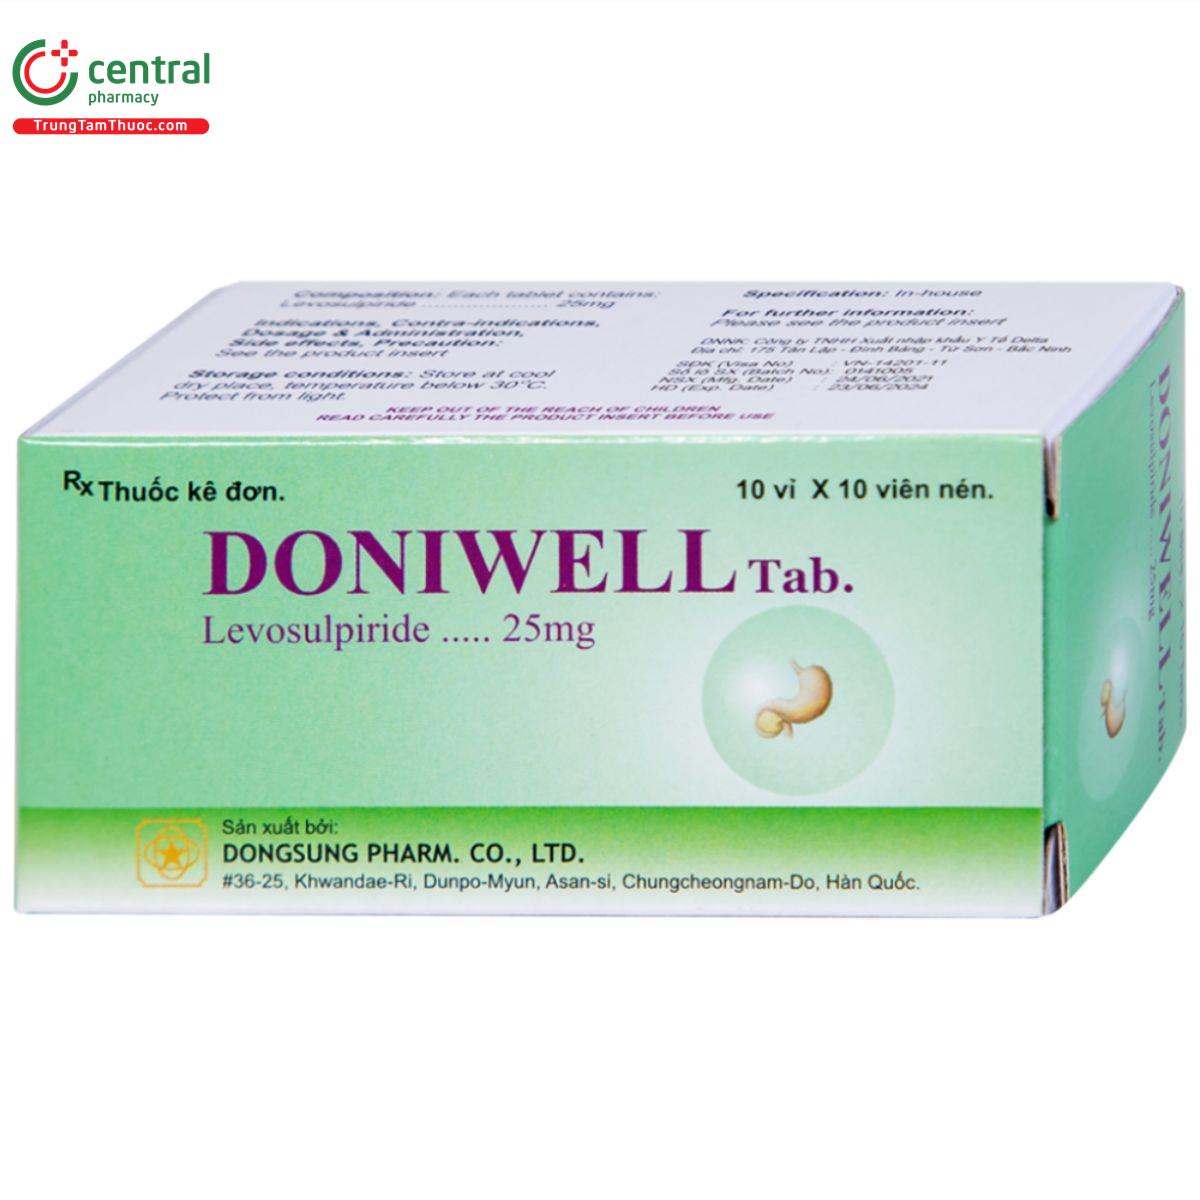 doniwell 10 R7250